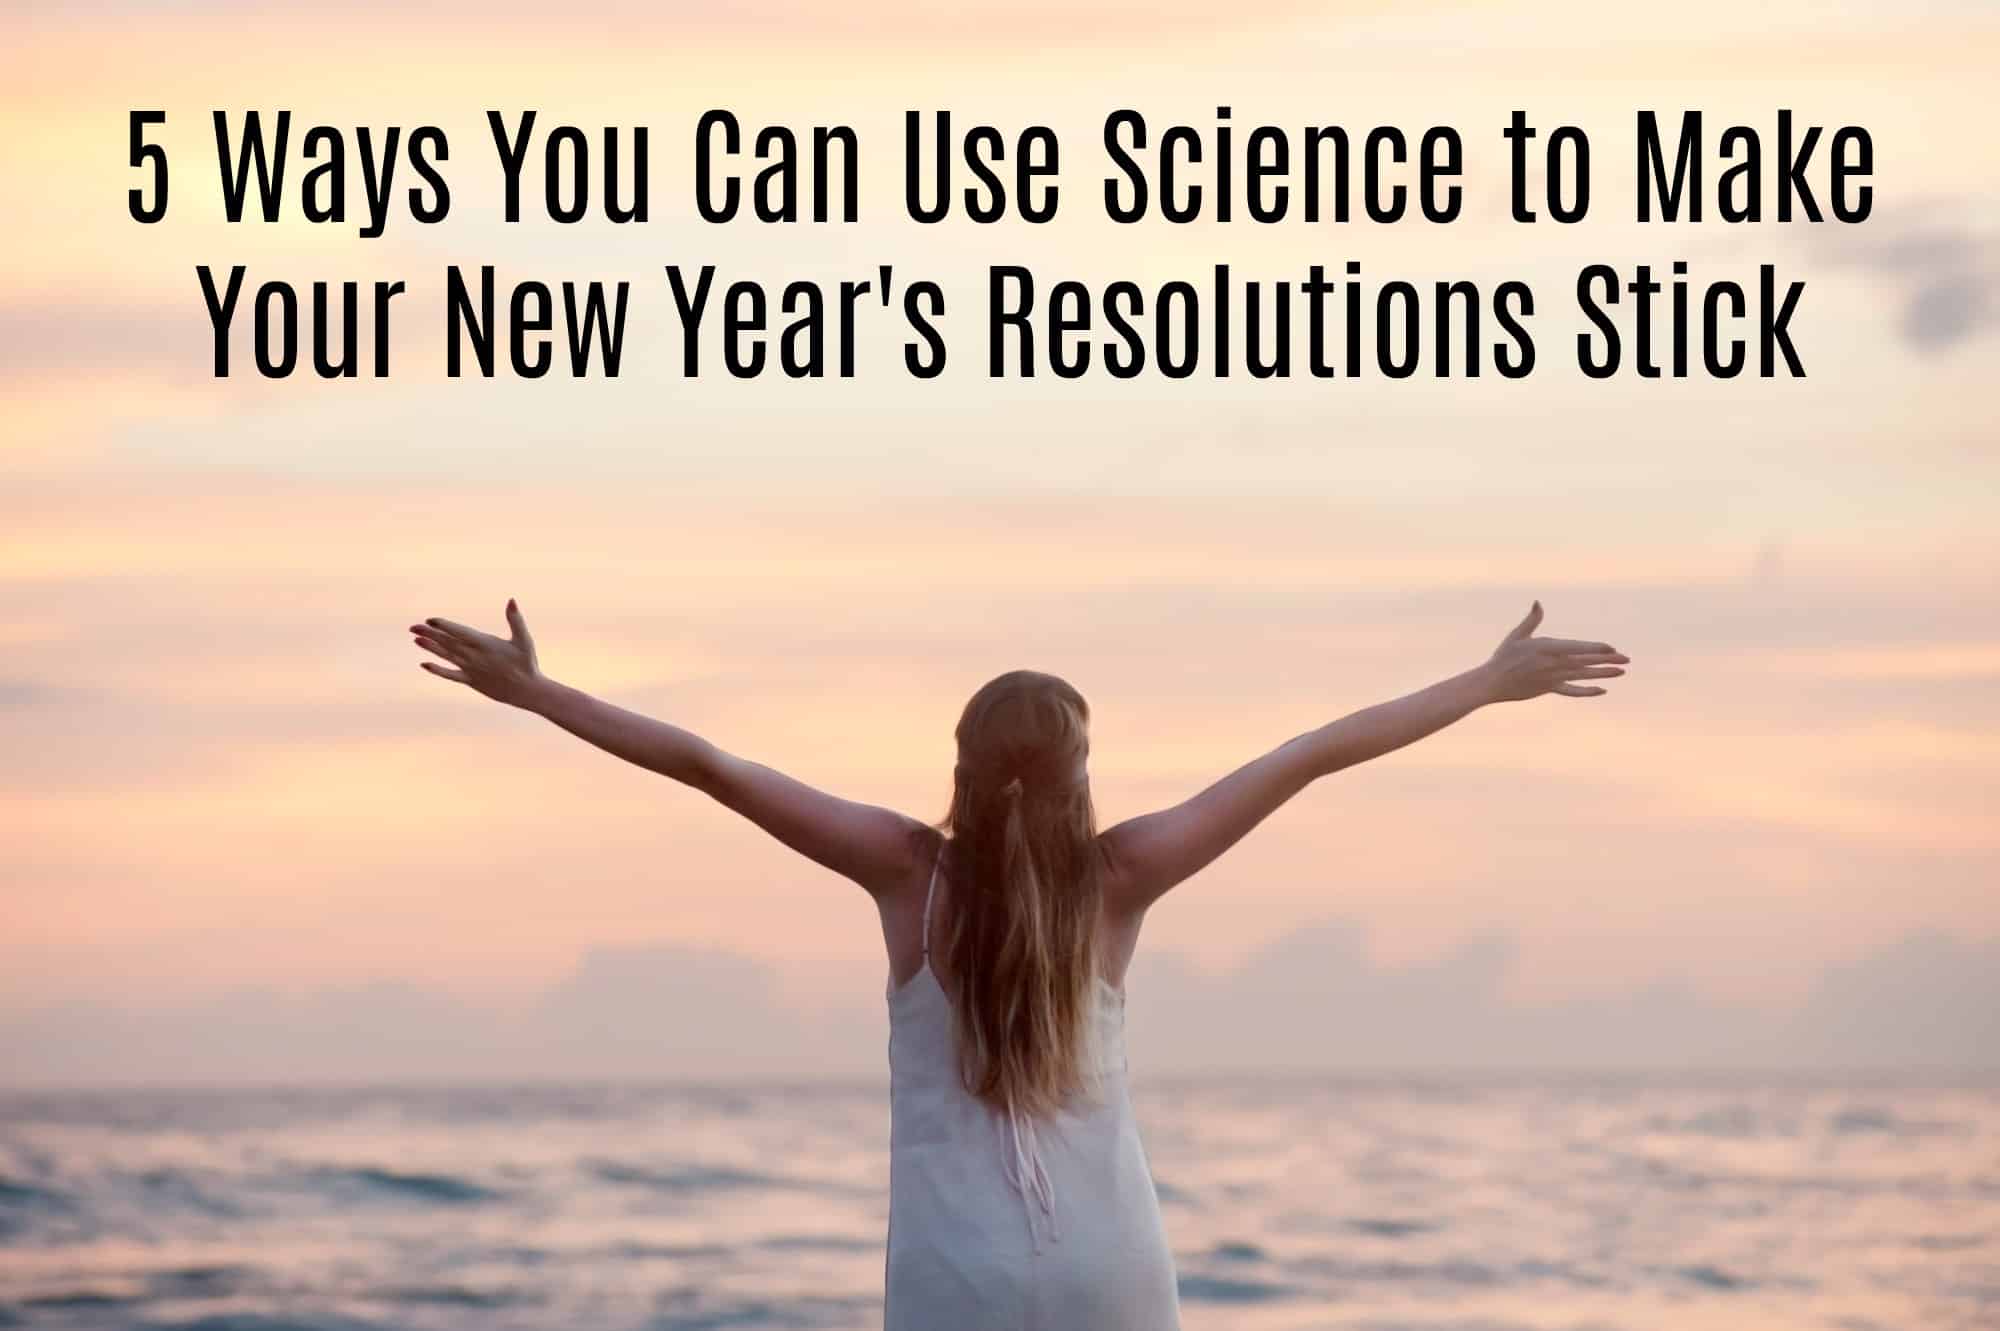 5 Ways You Can Use Science to Make Your New Year's Resolutions Stick